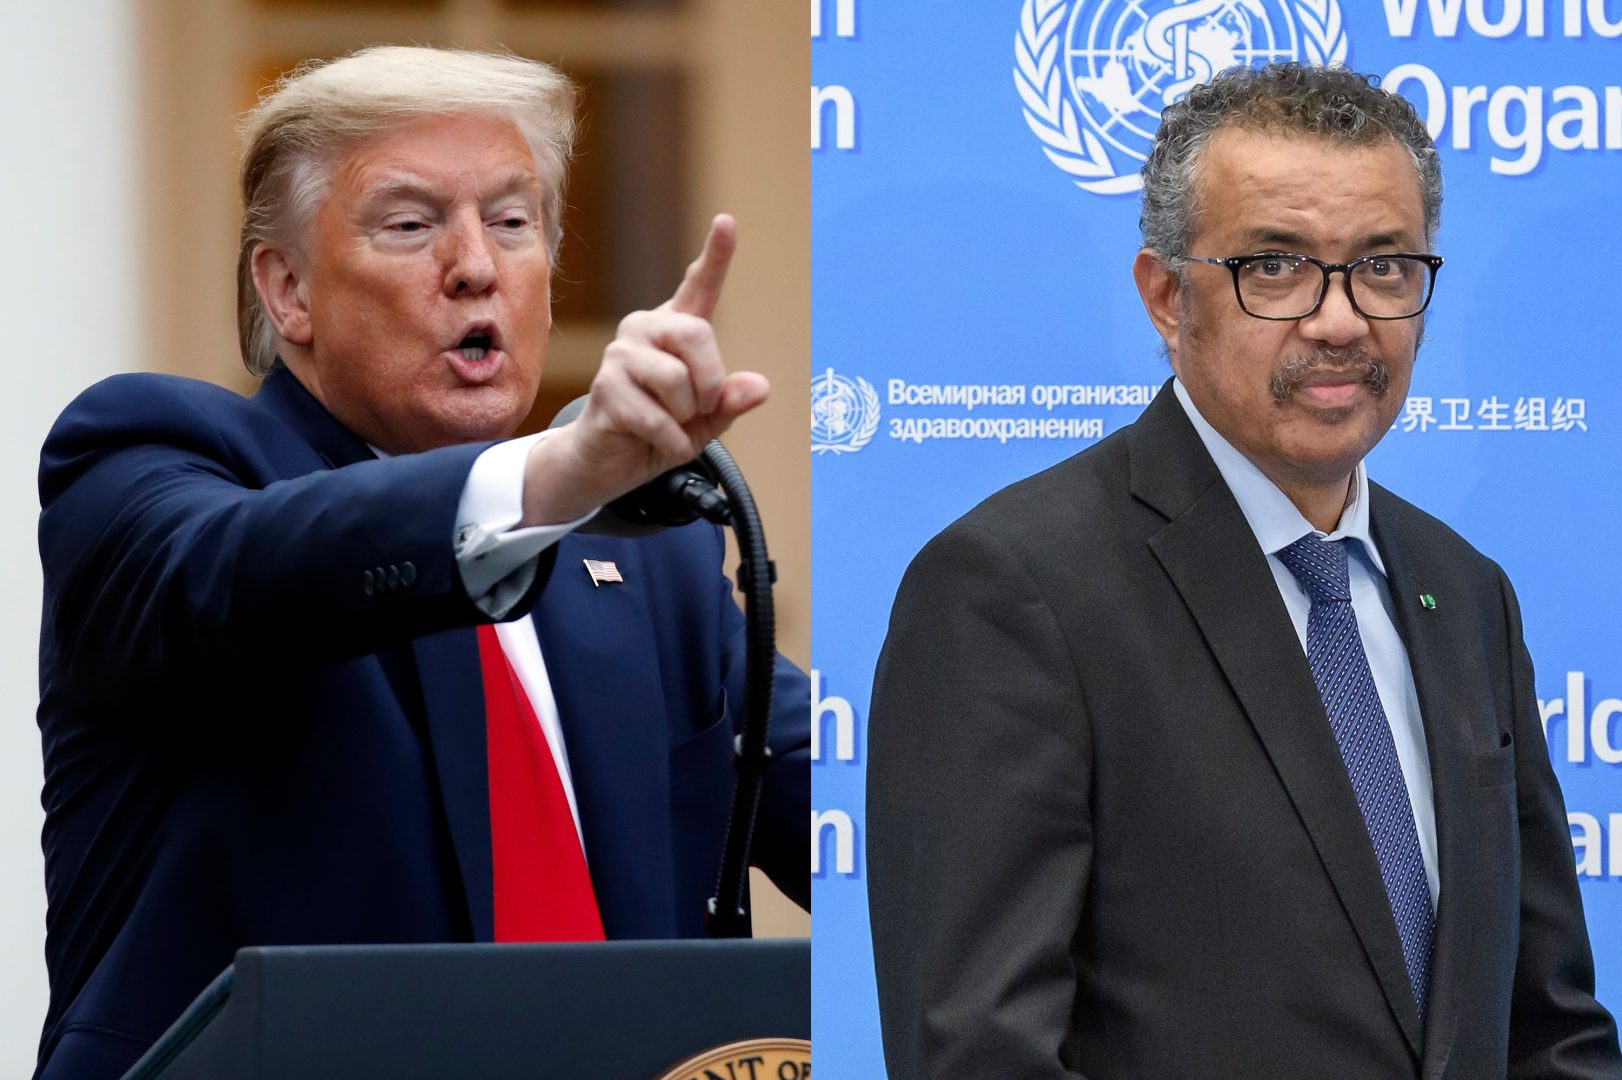 President Trump at the daily coronavirus briefing on Tuesday, when he declared his intent to halt funding to the World Health Organization, and Dr. Tedros Adhanom Ghebreyesus, director-general of WHO.